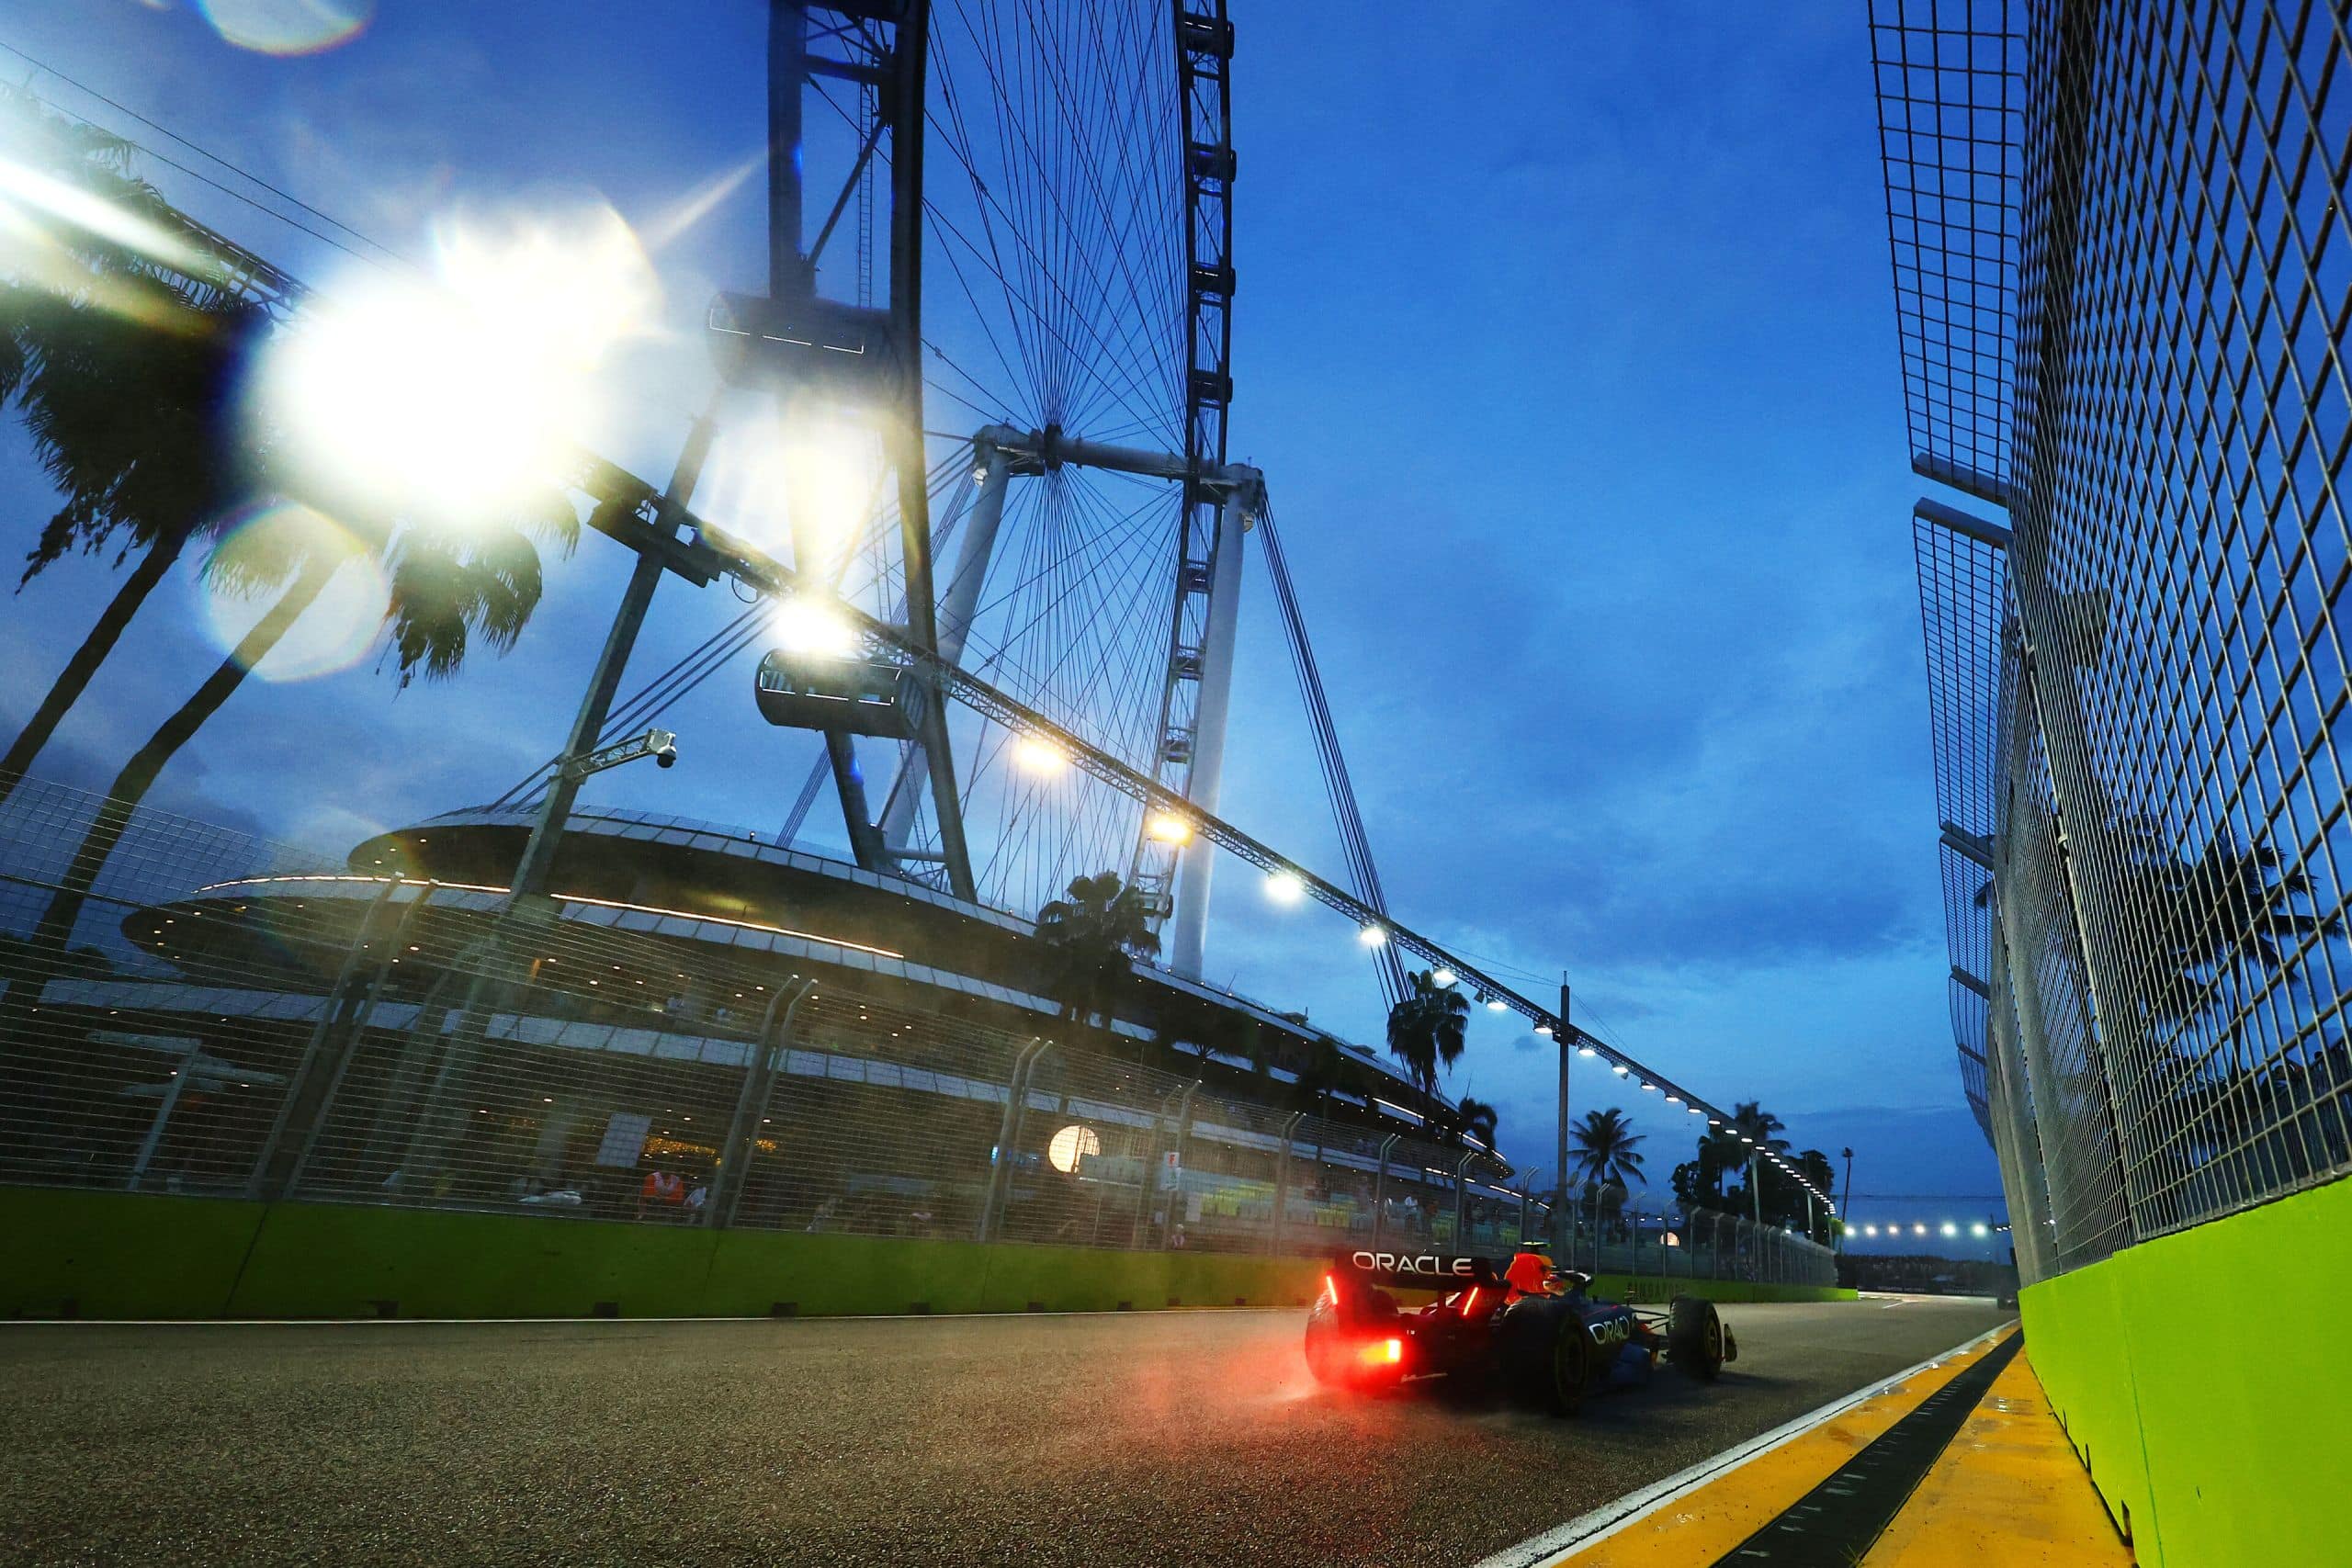 Why Do They Race at Night in Singapore?